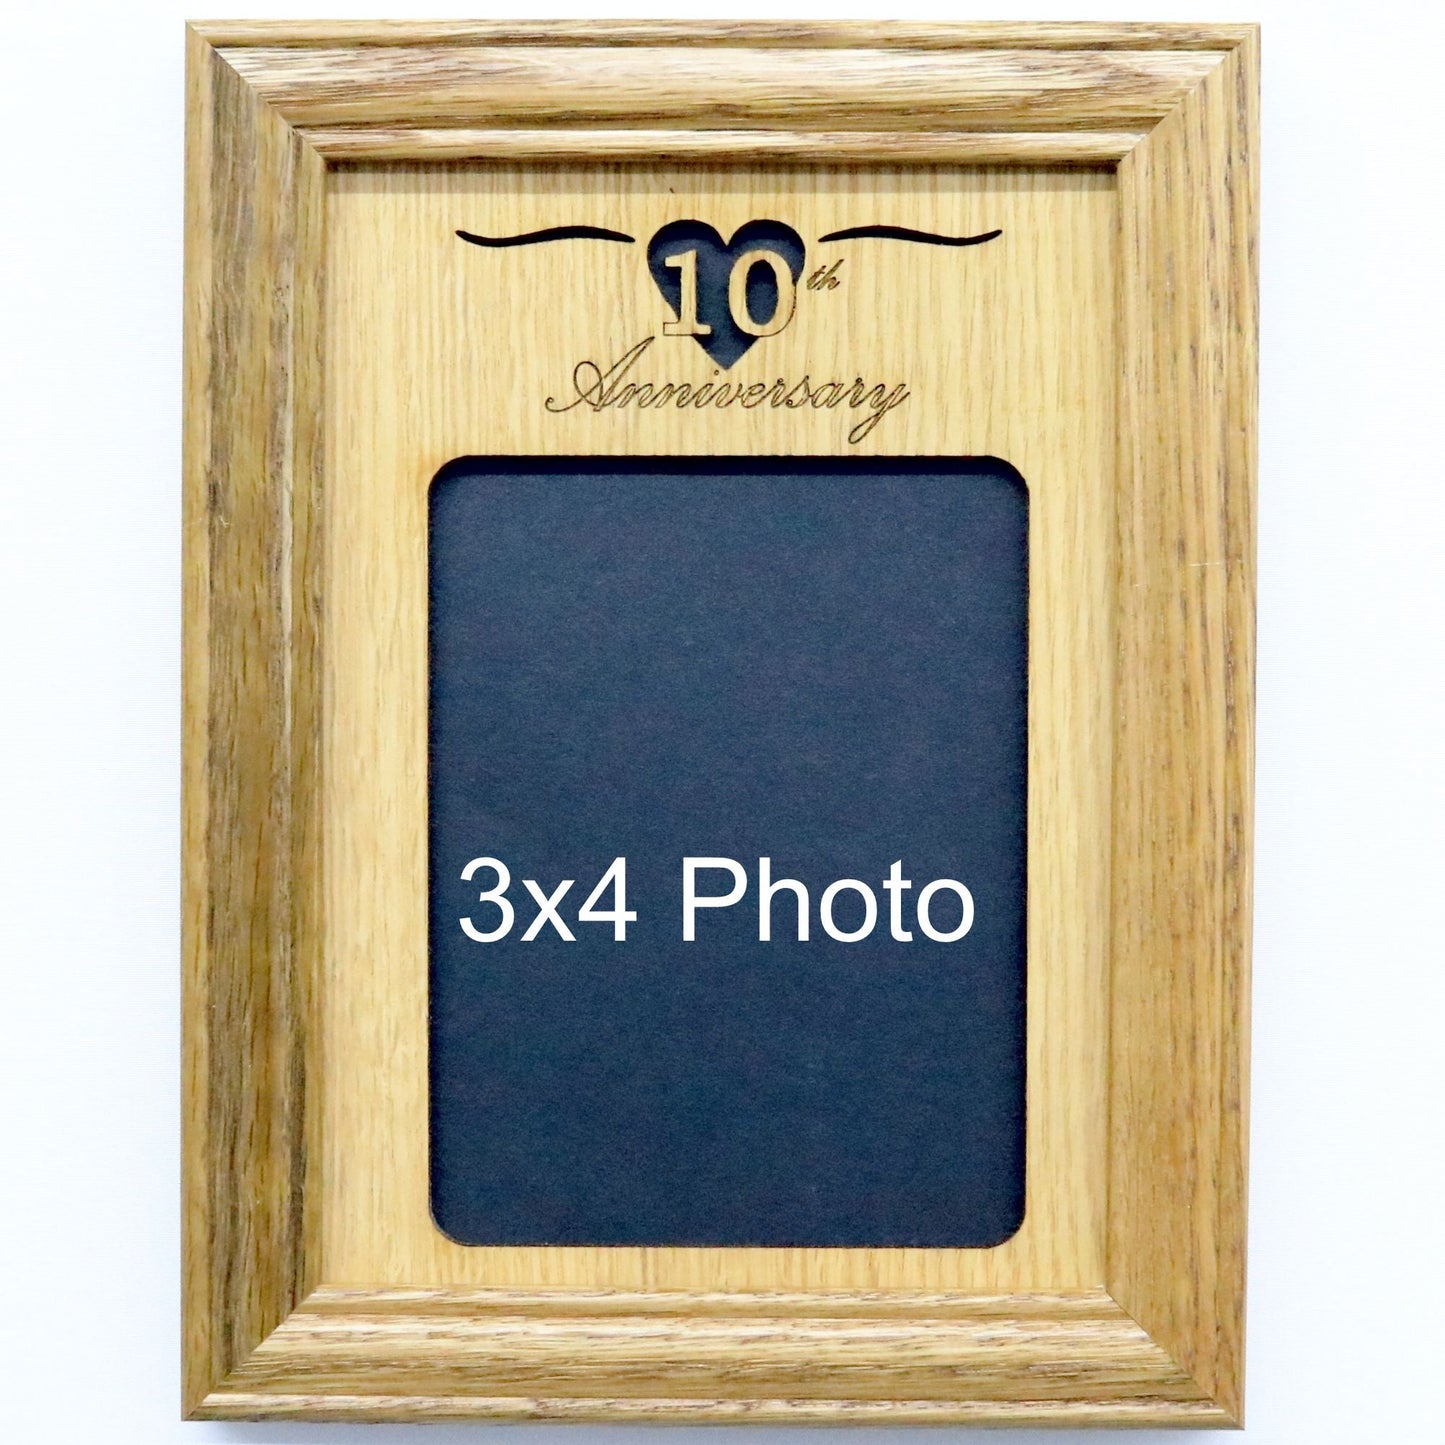 10th Anniversary Picture Frame - 10th Anniversary Picture Frame - 5x7 10th Anniversary Picture Frame holds a 3x4 Photo and can be personalized with your names. - Legacy Images - Picture Frames - Legacy Images - Picture Frames